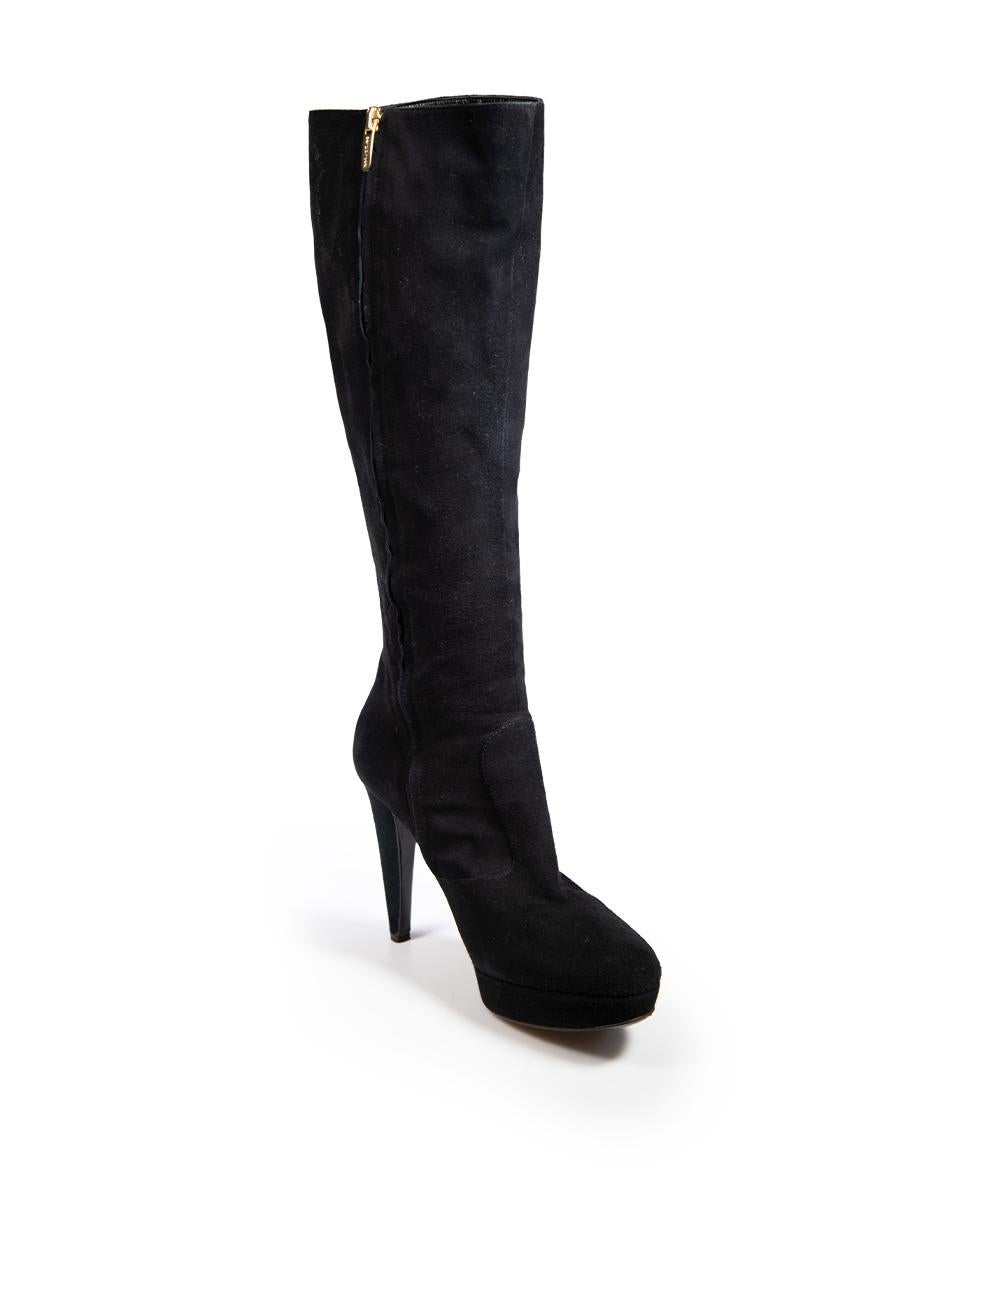 CONDITION is Very good. Minimal wear to boots is evident. Minimal wear to soles, with light abrasions/loosening of the suede pile on this used Sergio Rossi designer resale item.
 
 
 
 Details
 
 
 Black
 
 Suede
 
 Boots
 
 Knee high
 
 Almond toe
